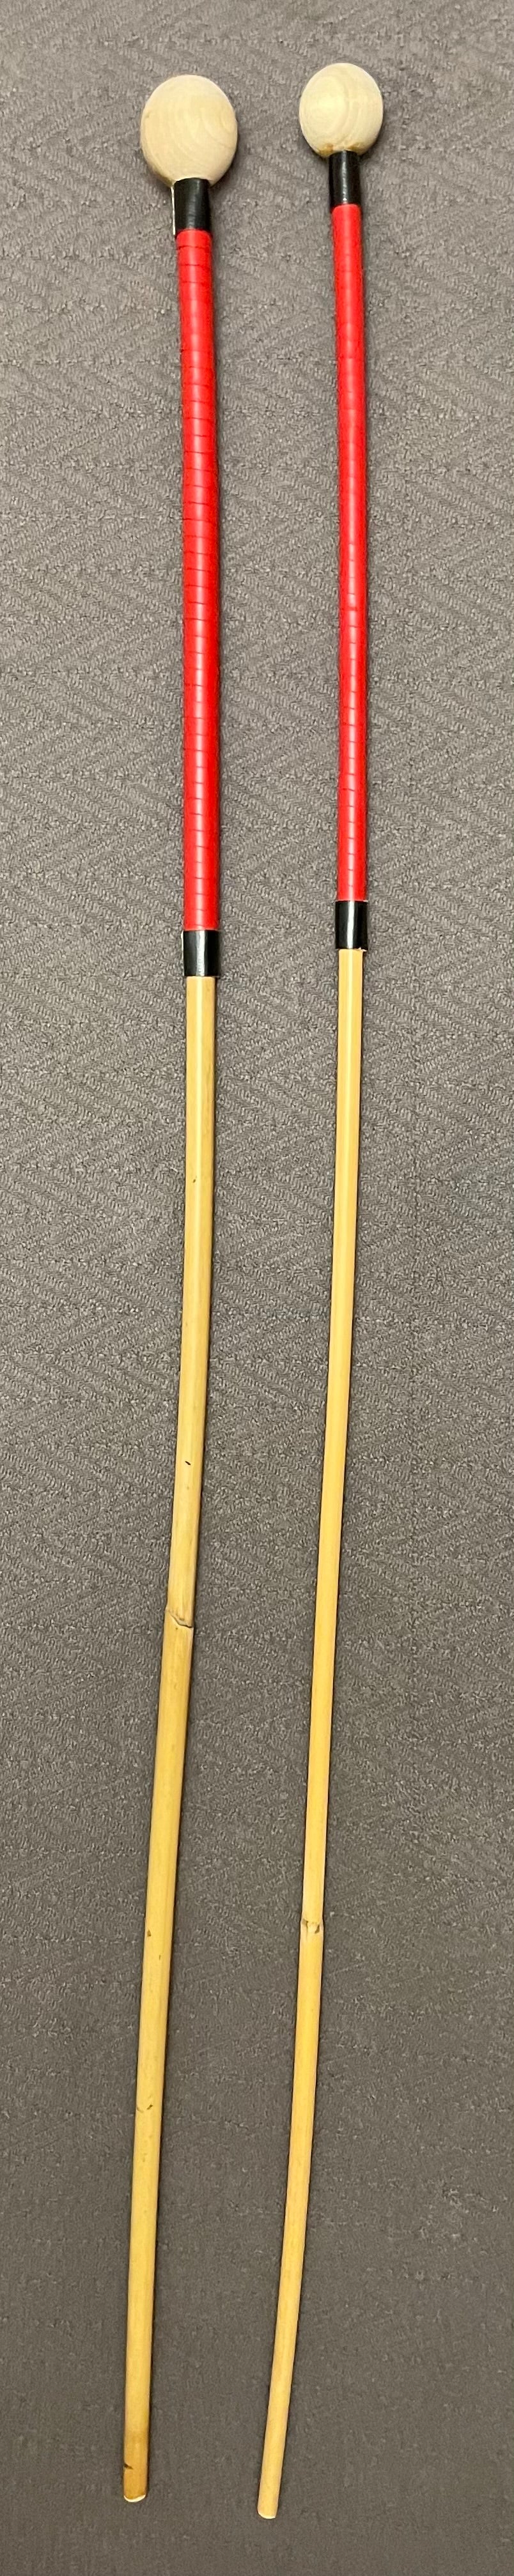 The Equestrian Trainer Pair of Classic Dragon Rattan Punishment Cane / Judicial Dragon Cane - 100-105 cms Length & 11.5-12.5mm Thickness